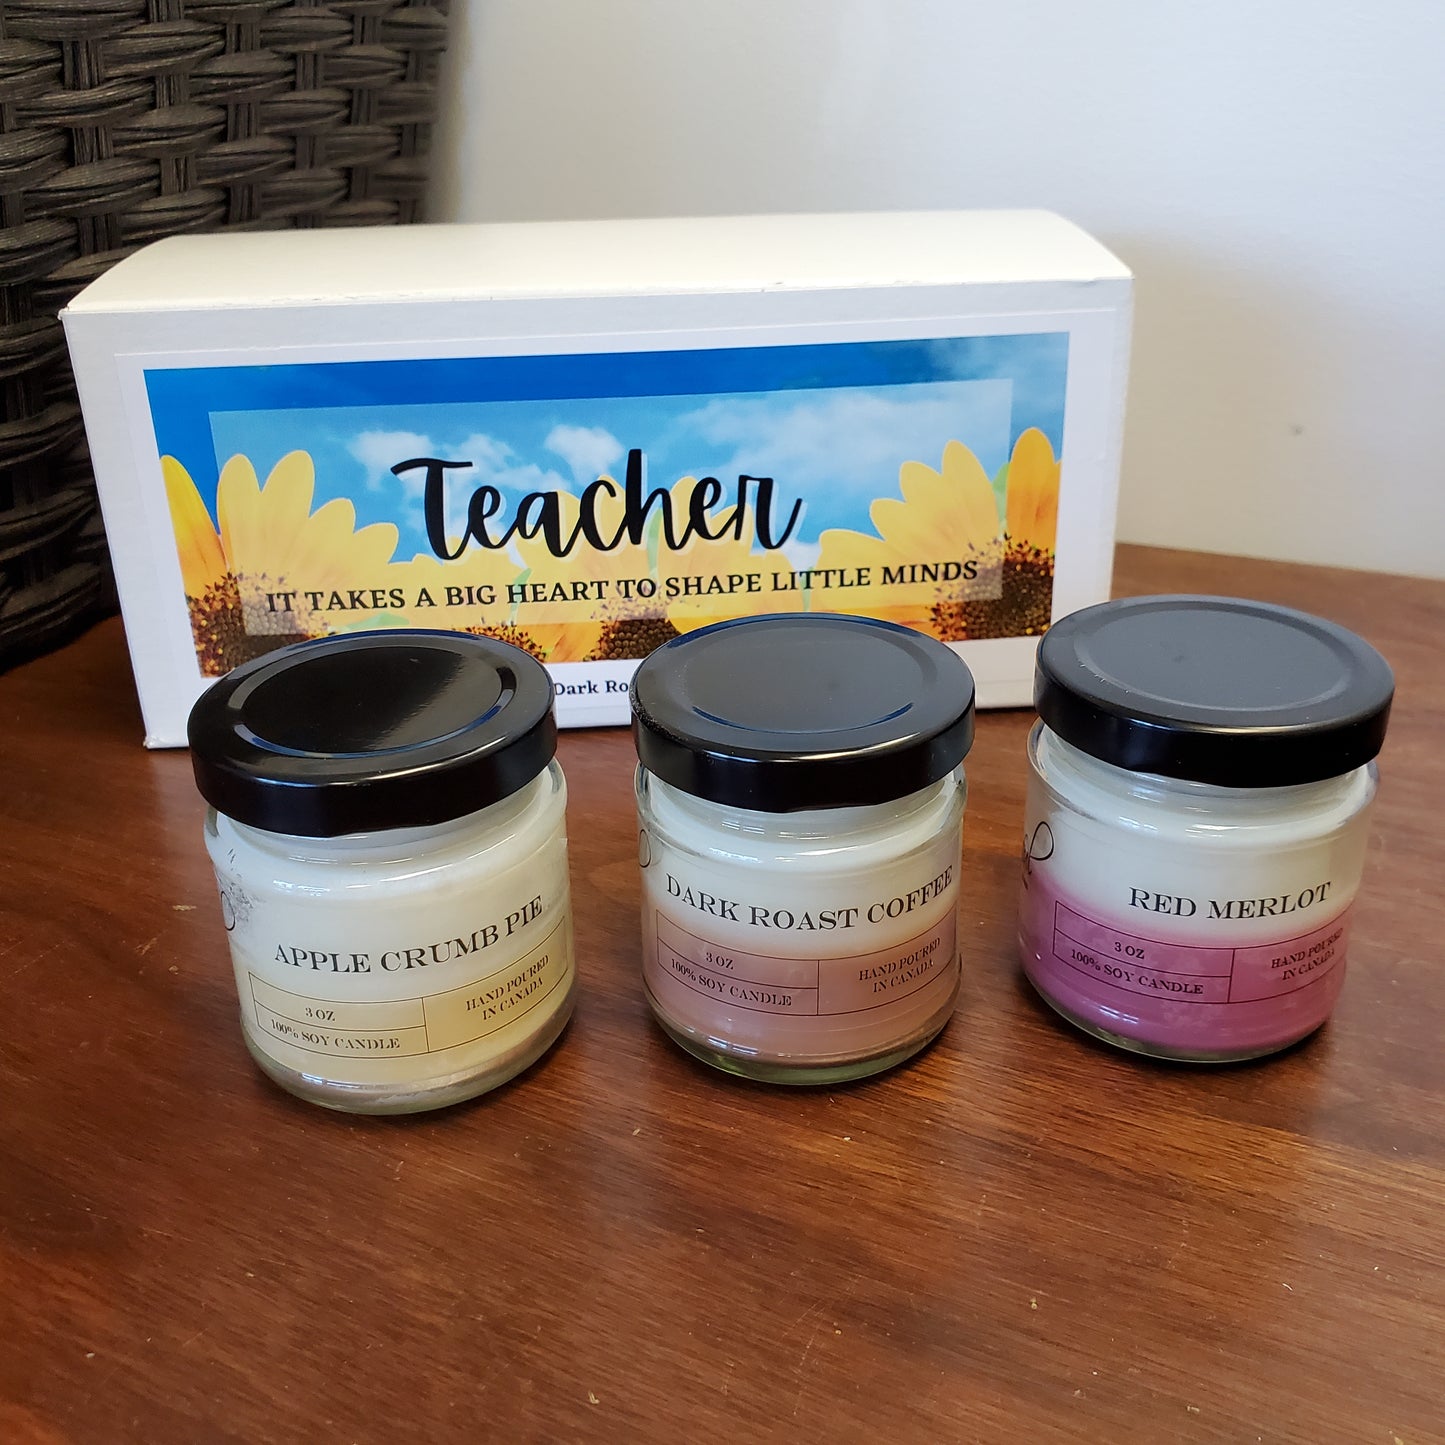 Teacher it takes Big Hearts to Shape Little Minds Candle Sample set includes Apple Crumble Pie, Dark Roast Coffee, and Red Merlot. 